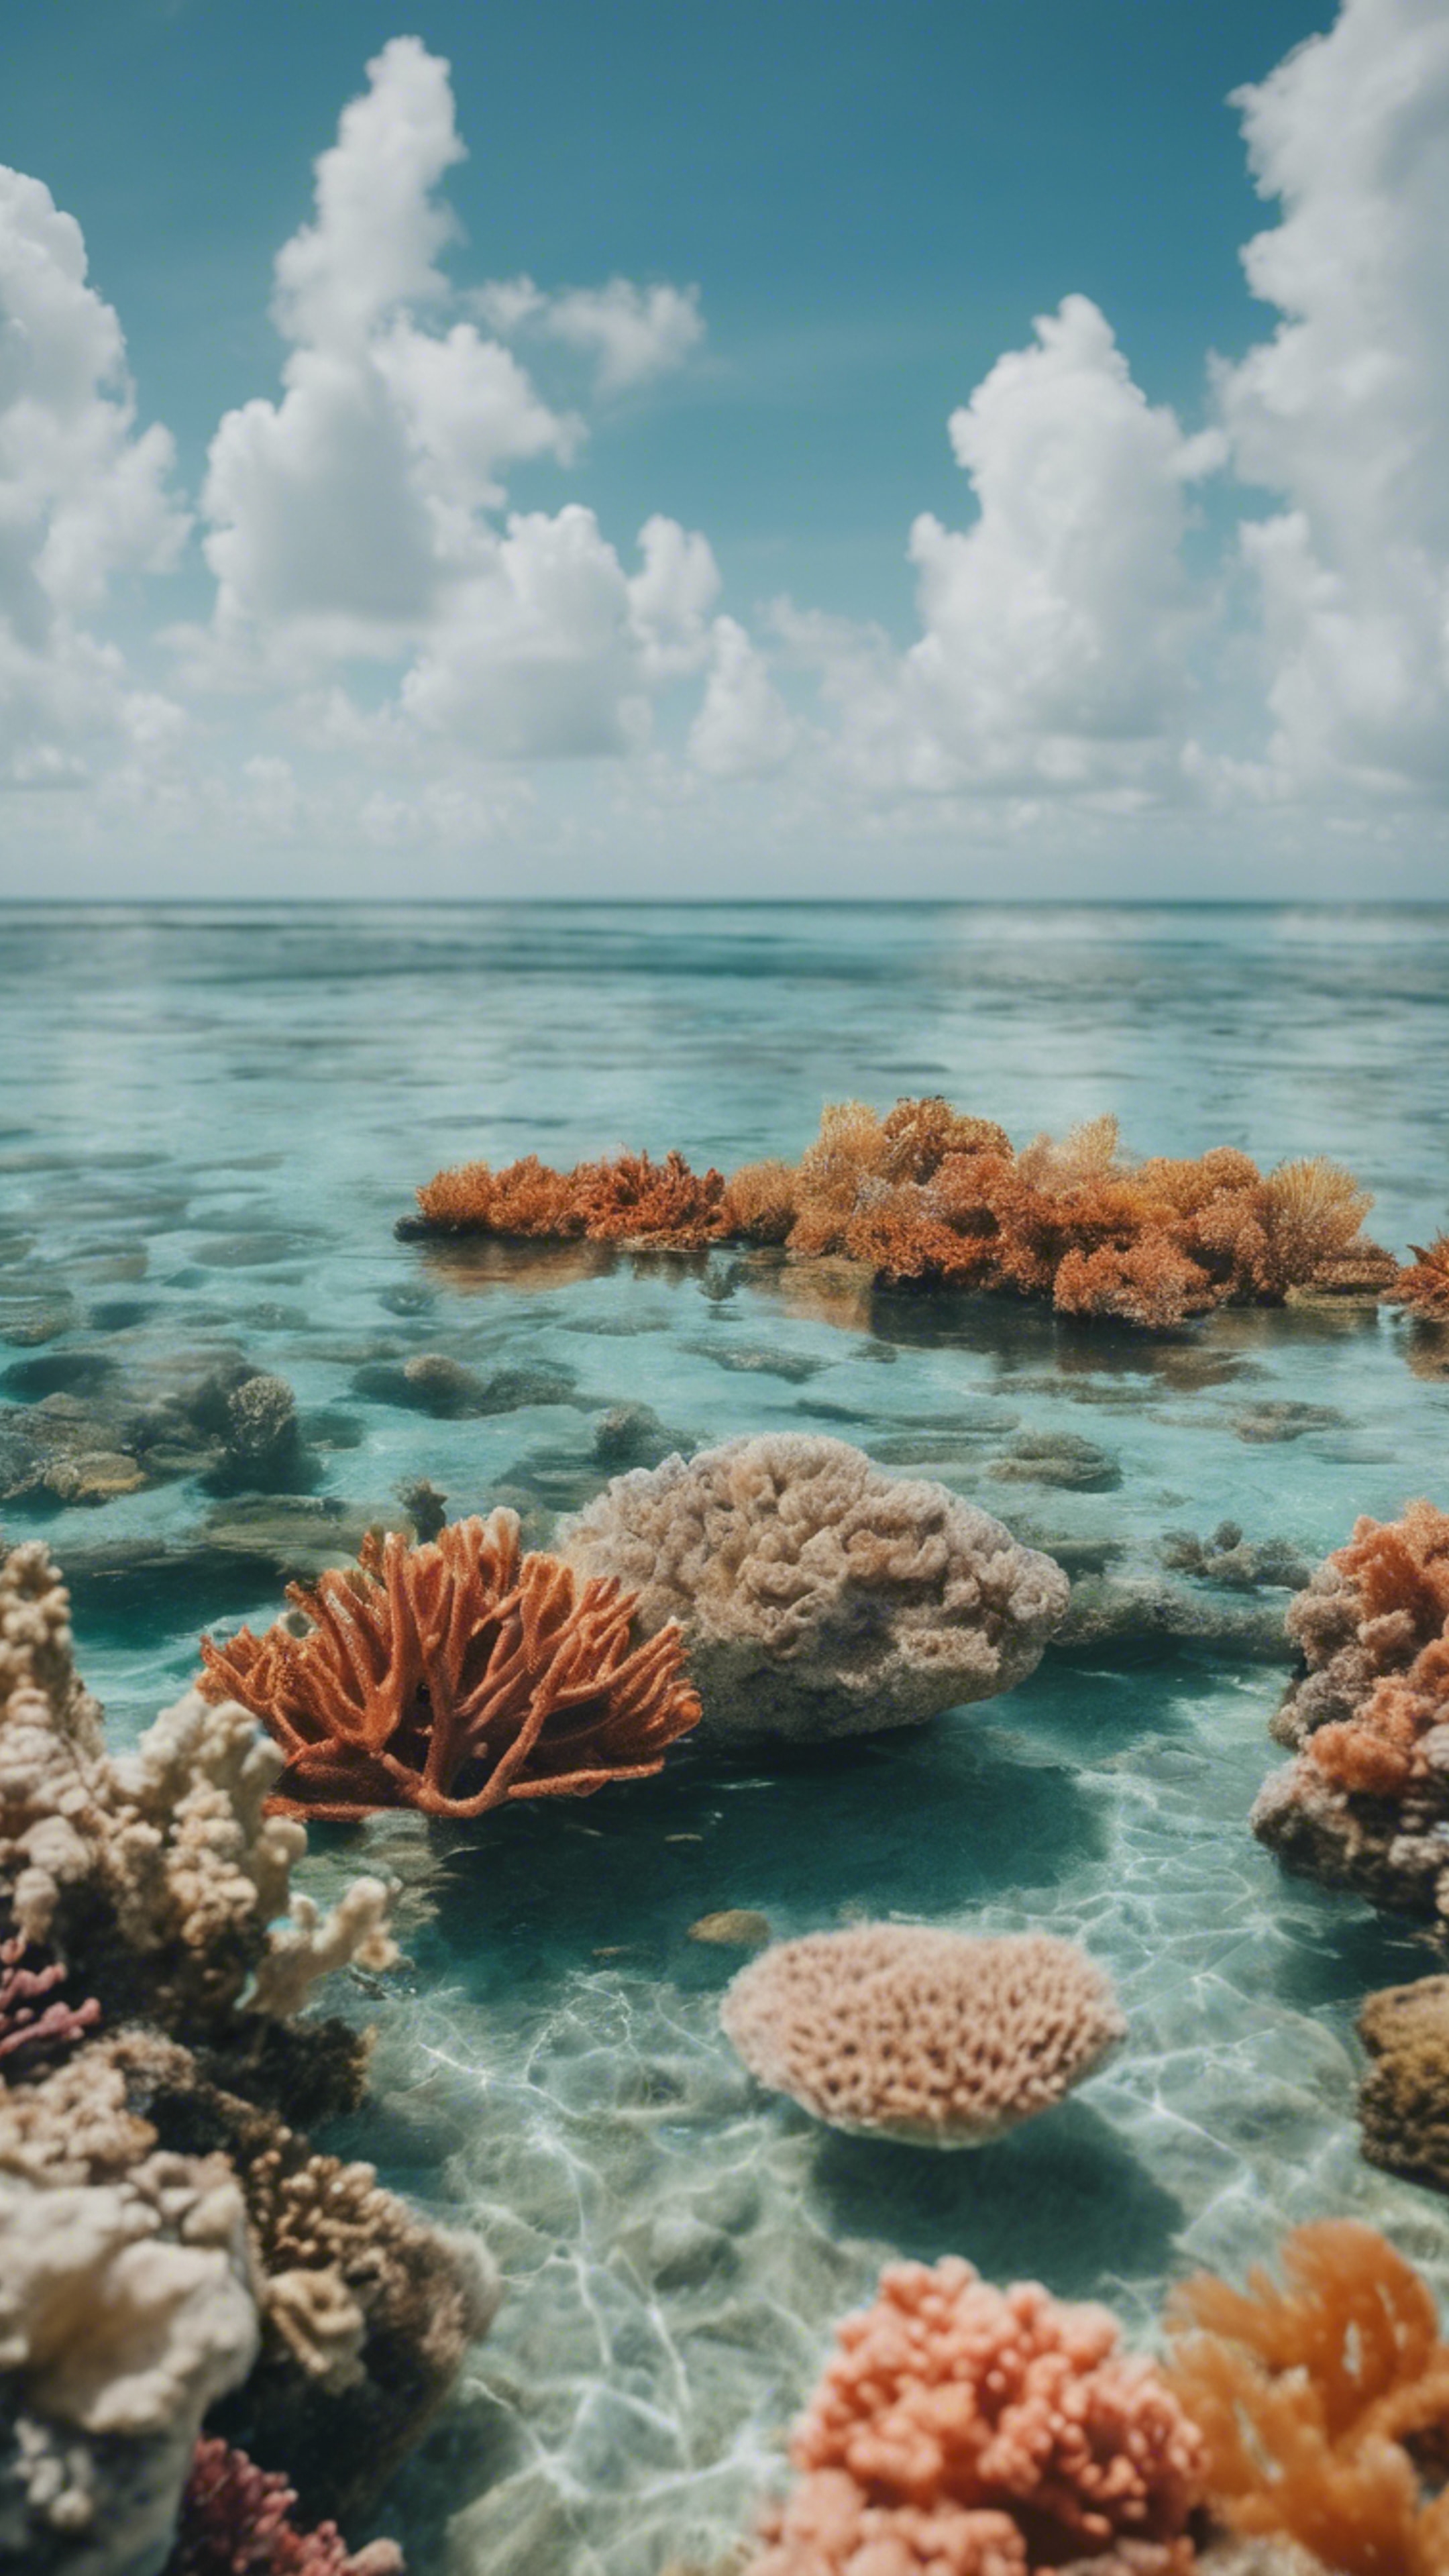 A serene view of the Florida Keys with crystal clear water and a colorful coral reef visible underwater. Kertas dinding[53a9c37260d942df83c4]